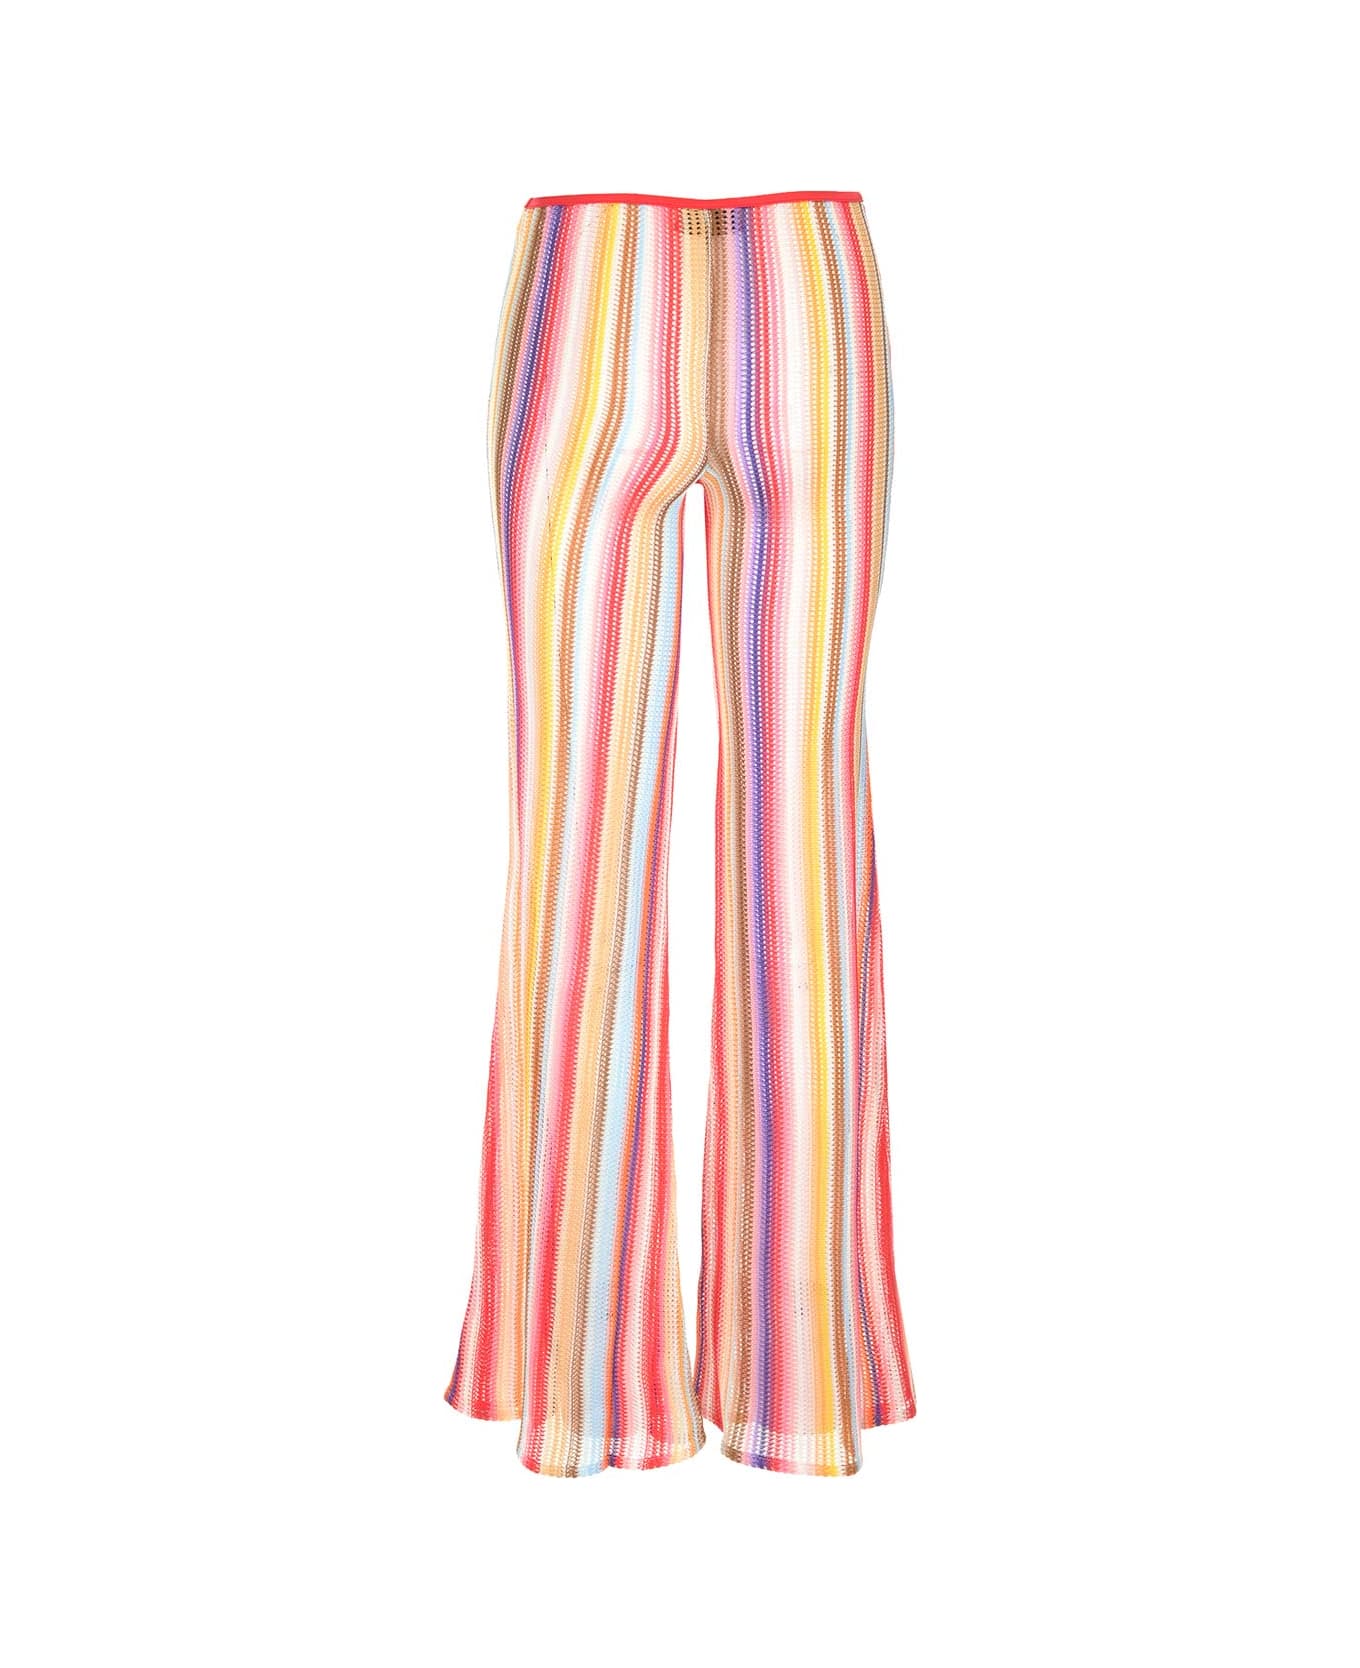 Missoni Flared Viscose Knit Trousers - Multicolor red strip ボトムス